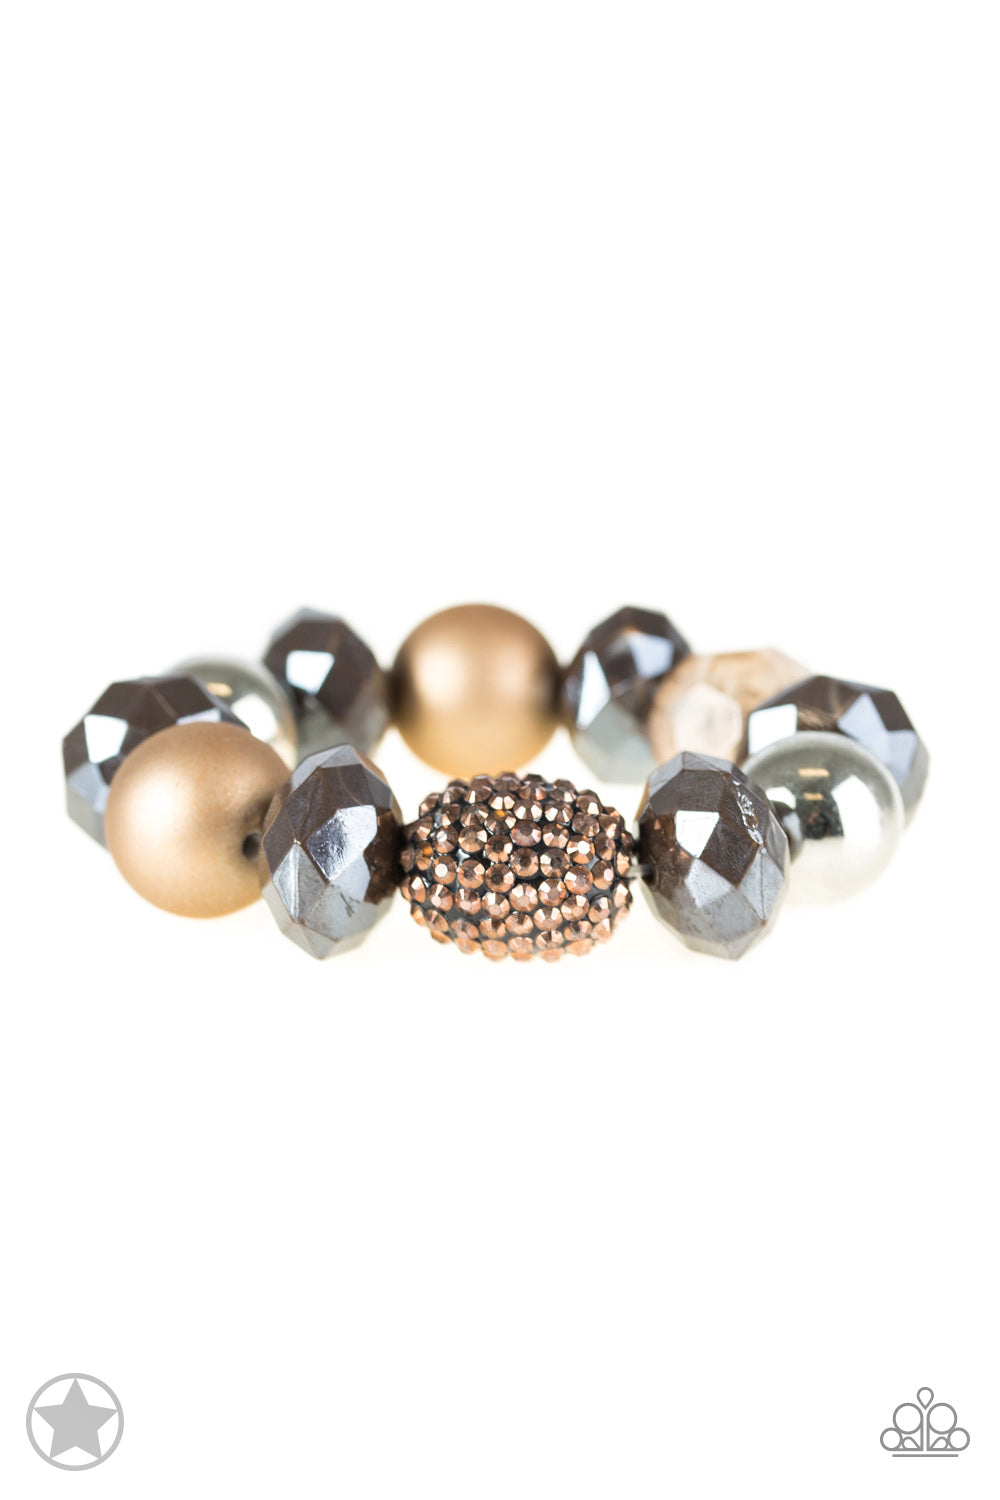 Warm beads in shades of brown and copper with reflective faceted edges and varying glazed finishes are offset by two shiny silver beads. An oblong bead studded with copper-toned rhinestones adds a dramatic accent.